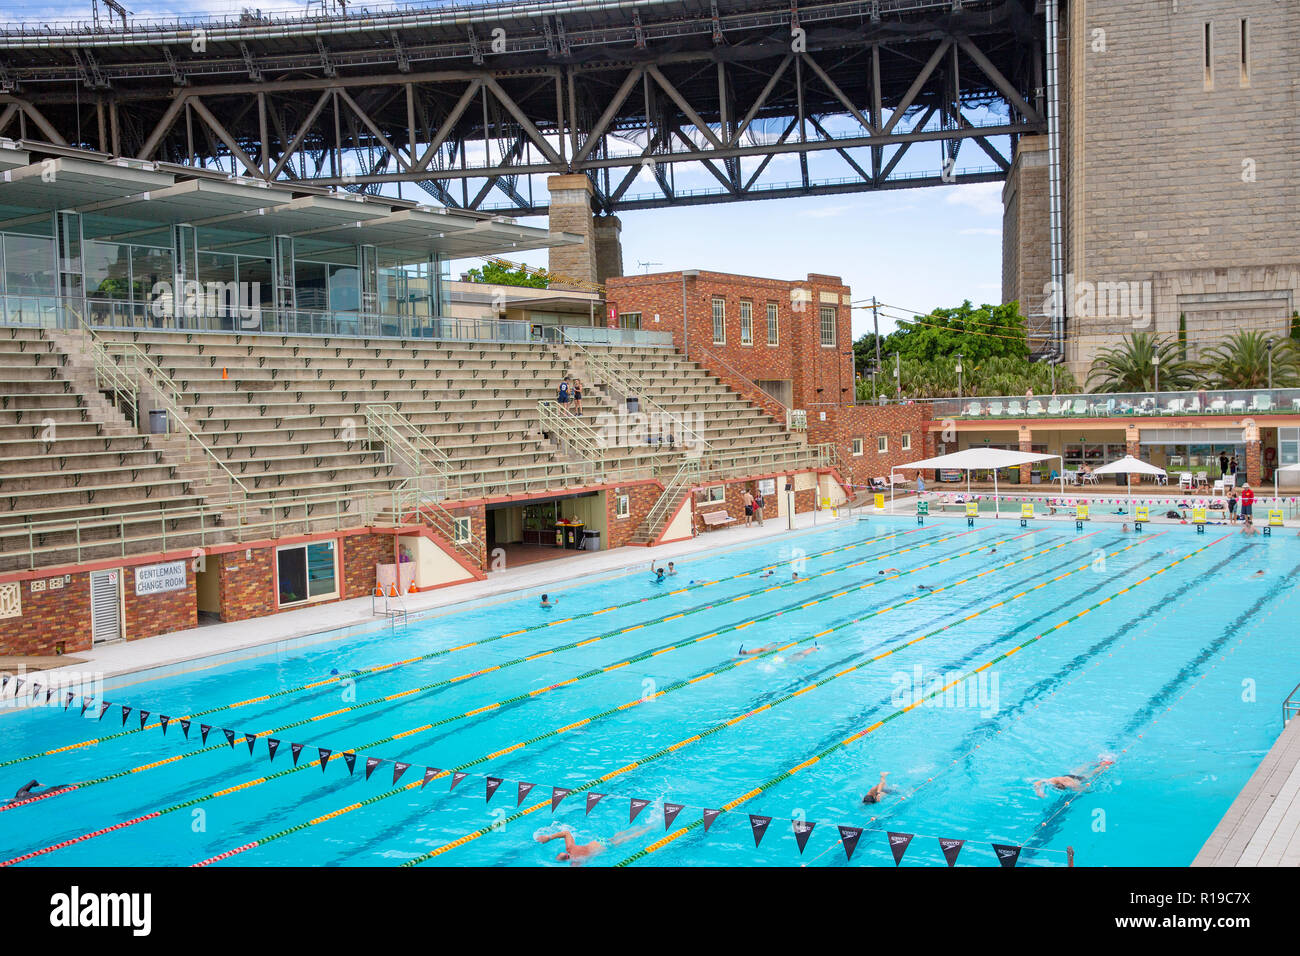 People swimming in the public swimming pool at Milsons Point North Sydney,Australia Stock Photo